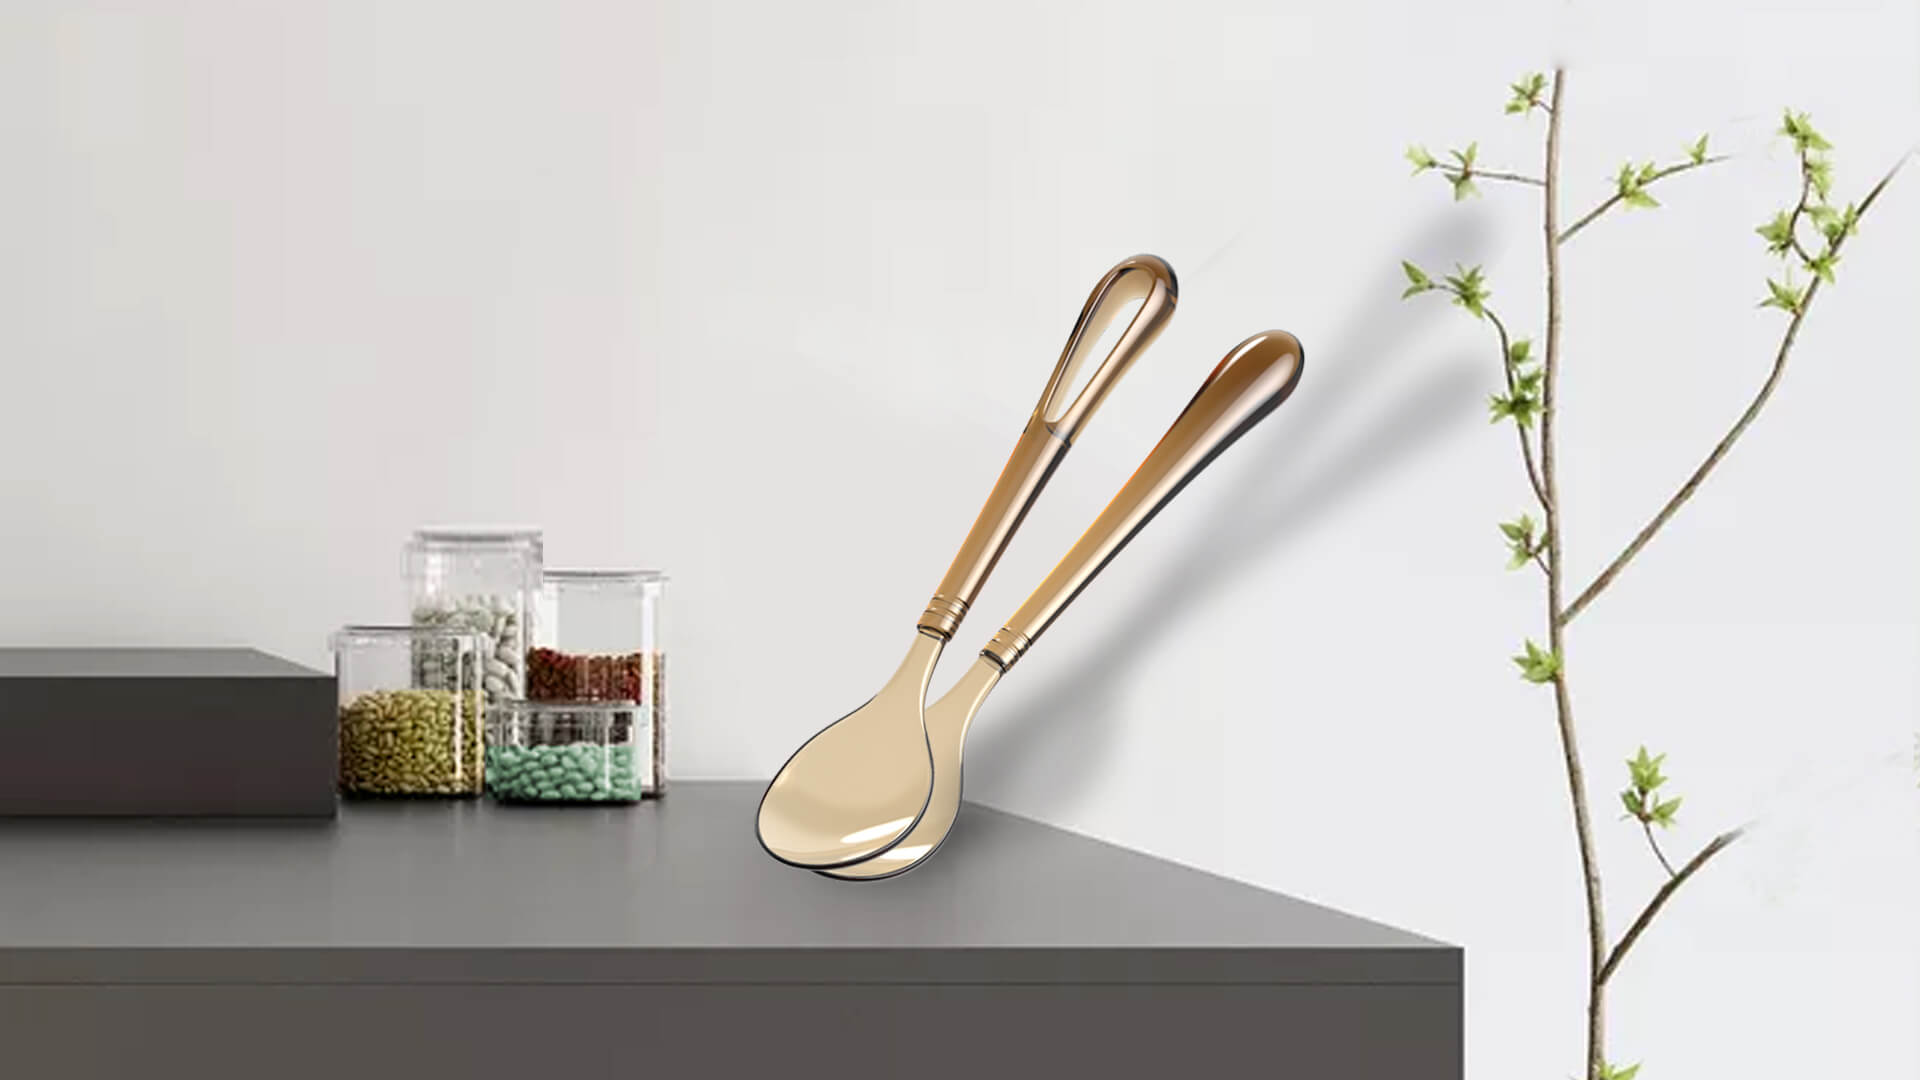 Spoon Product Design